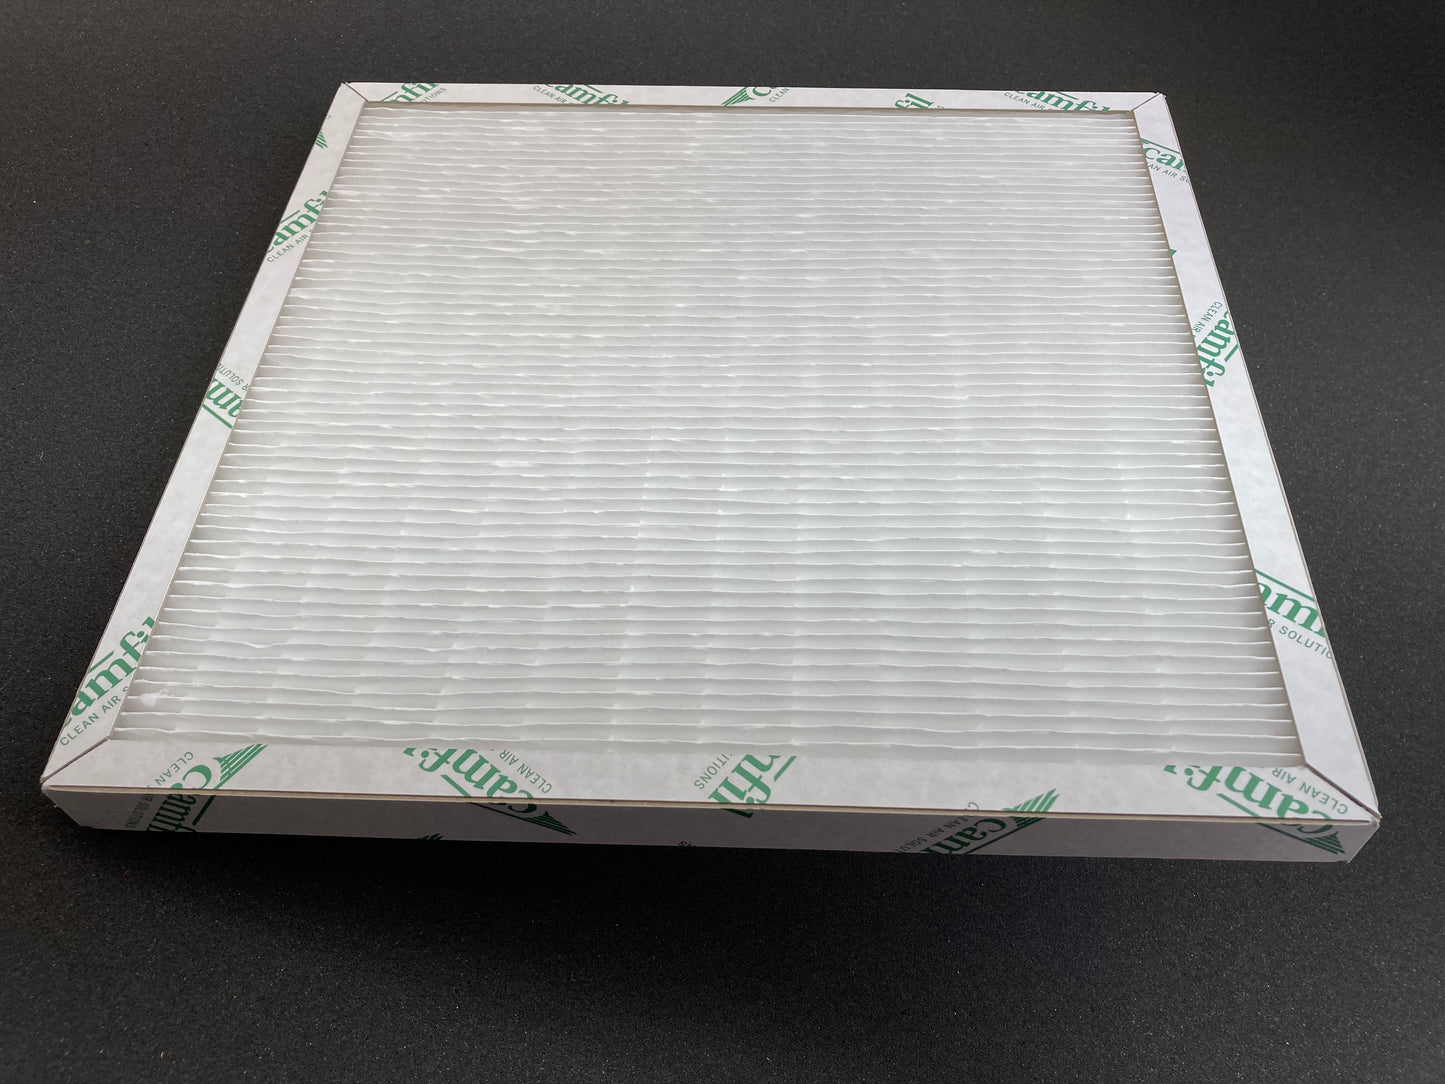 This filter is for the  Genvex GE Energy 3  models . Filter size is 330*350*25mm. This is an excellent machine and all parts if needed are available from ourselves. It is no longer manufactured. The replacement machine is the ECO 400.